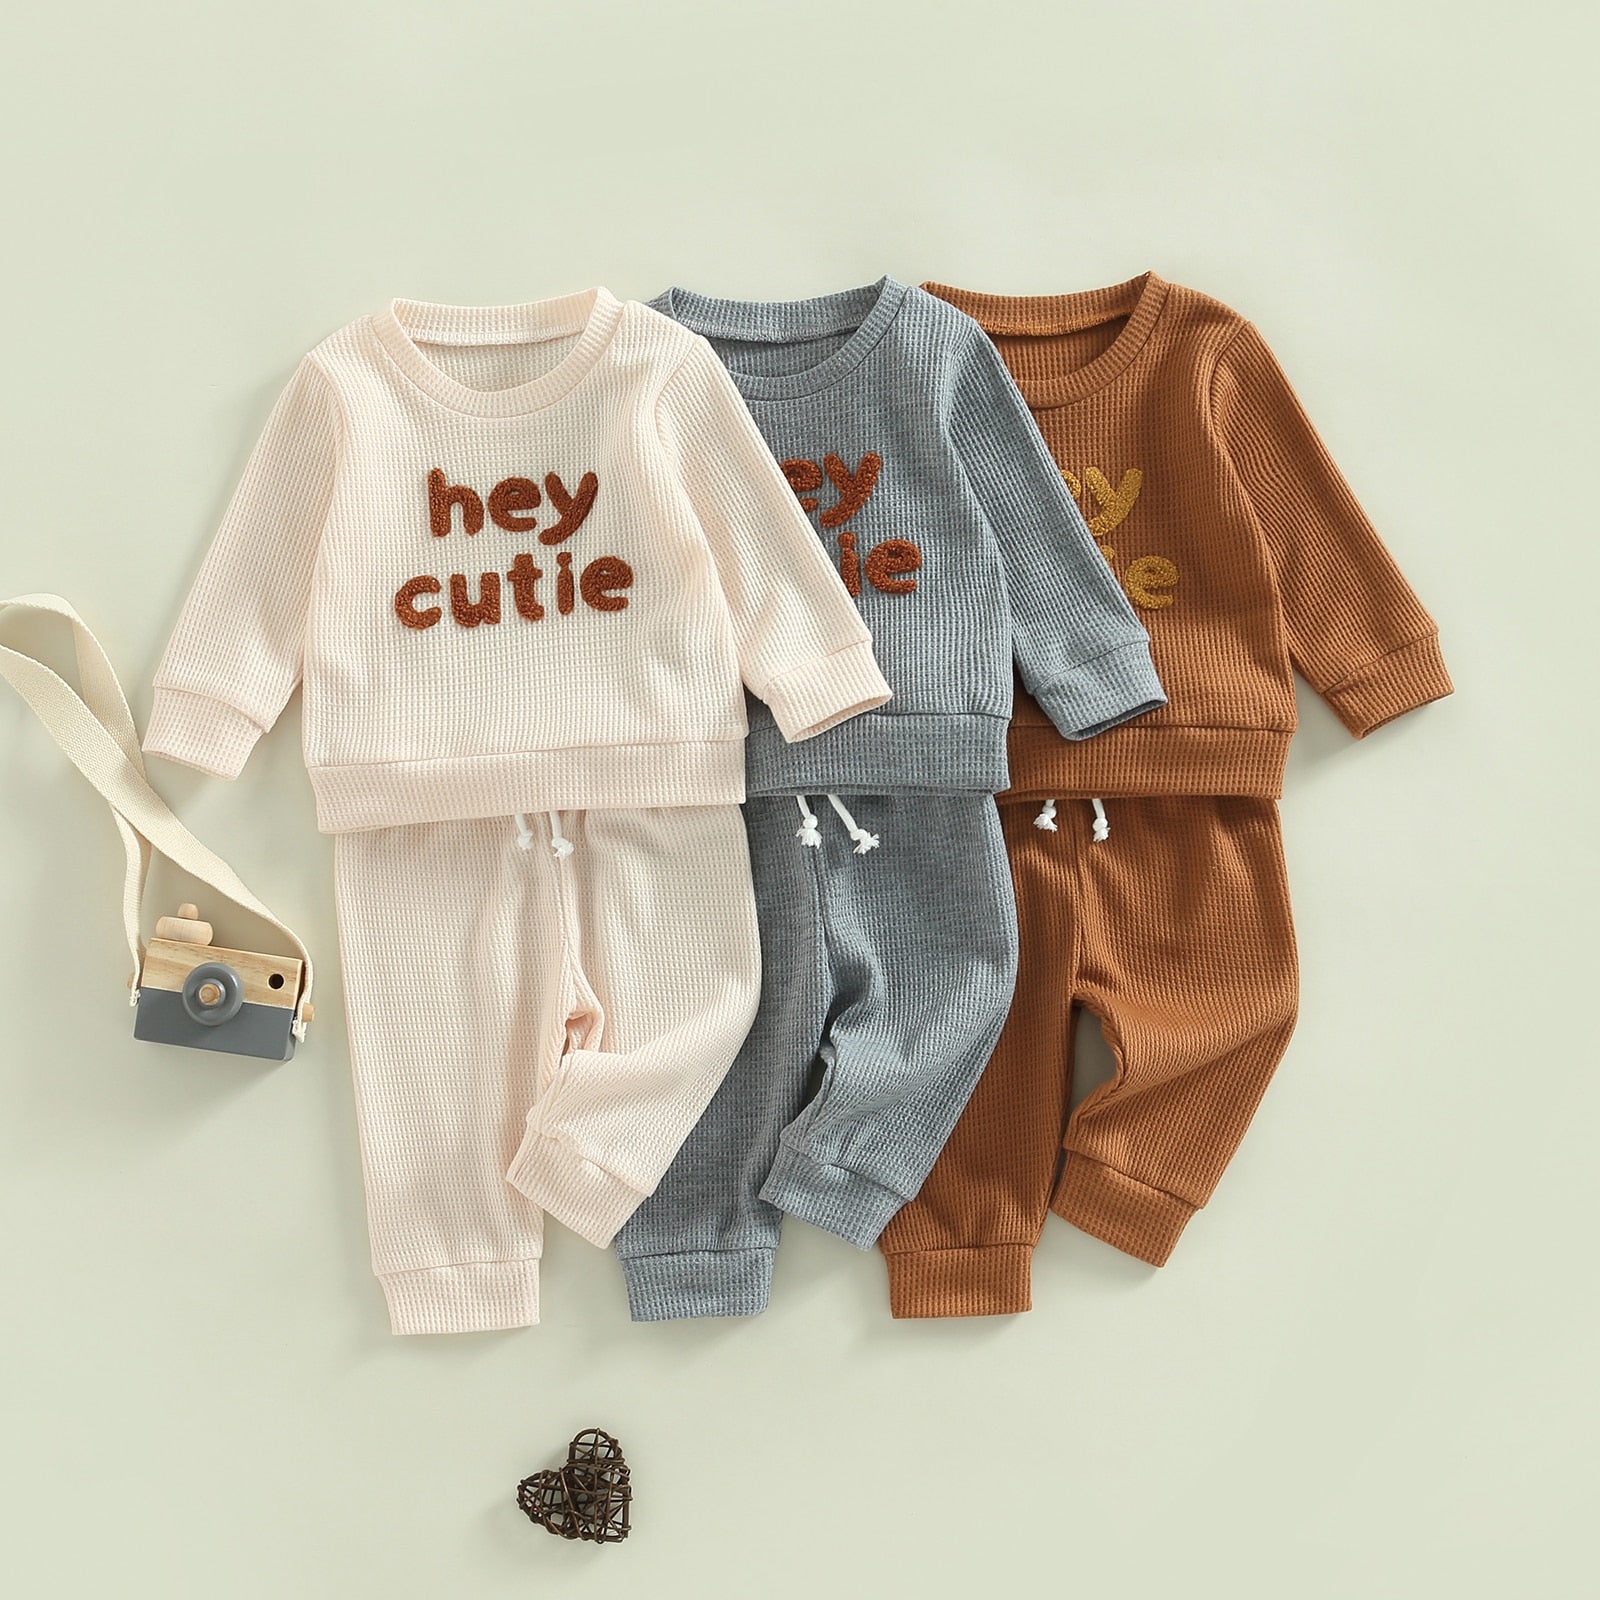 Toddler Baby Girl Boy 2Pcs Hey Cutie Outfit Long Sleeve Ribbed Knit To ...